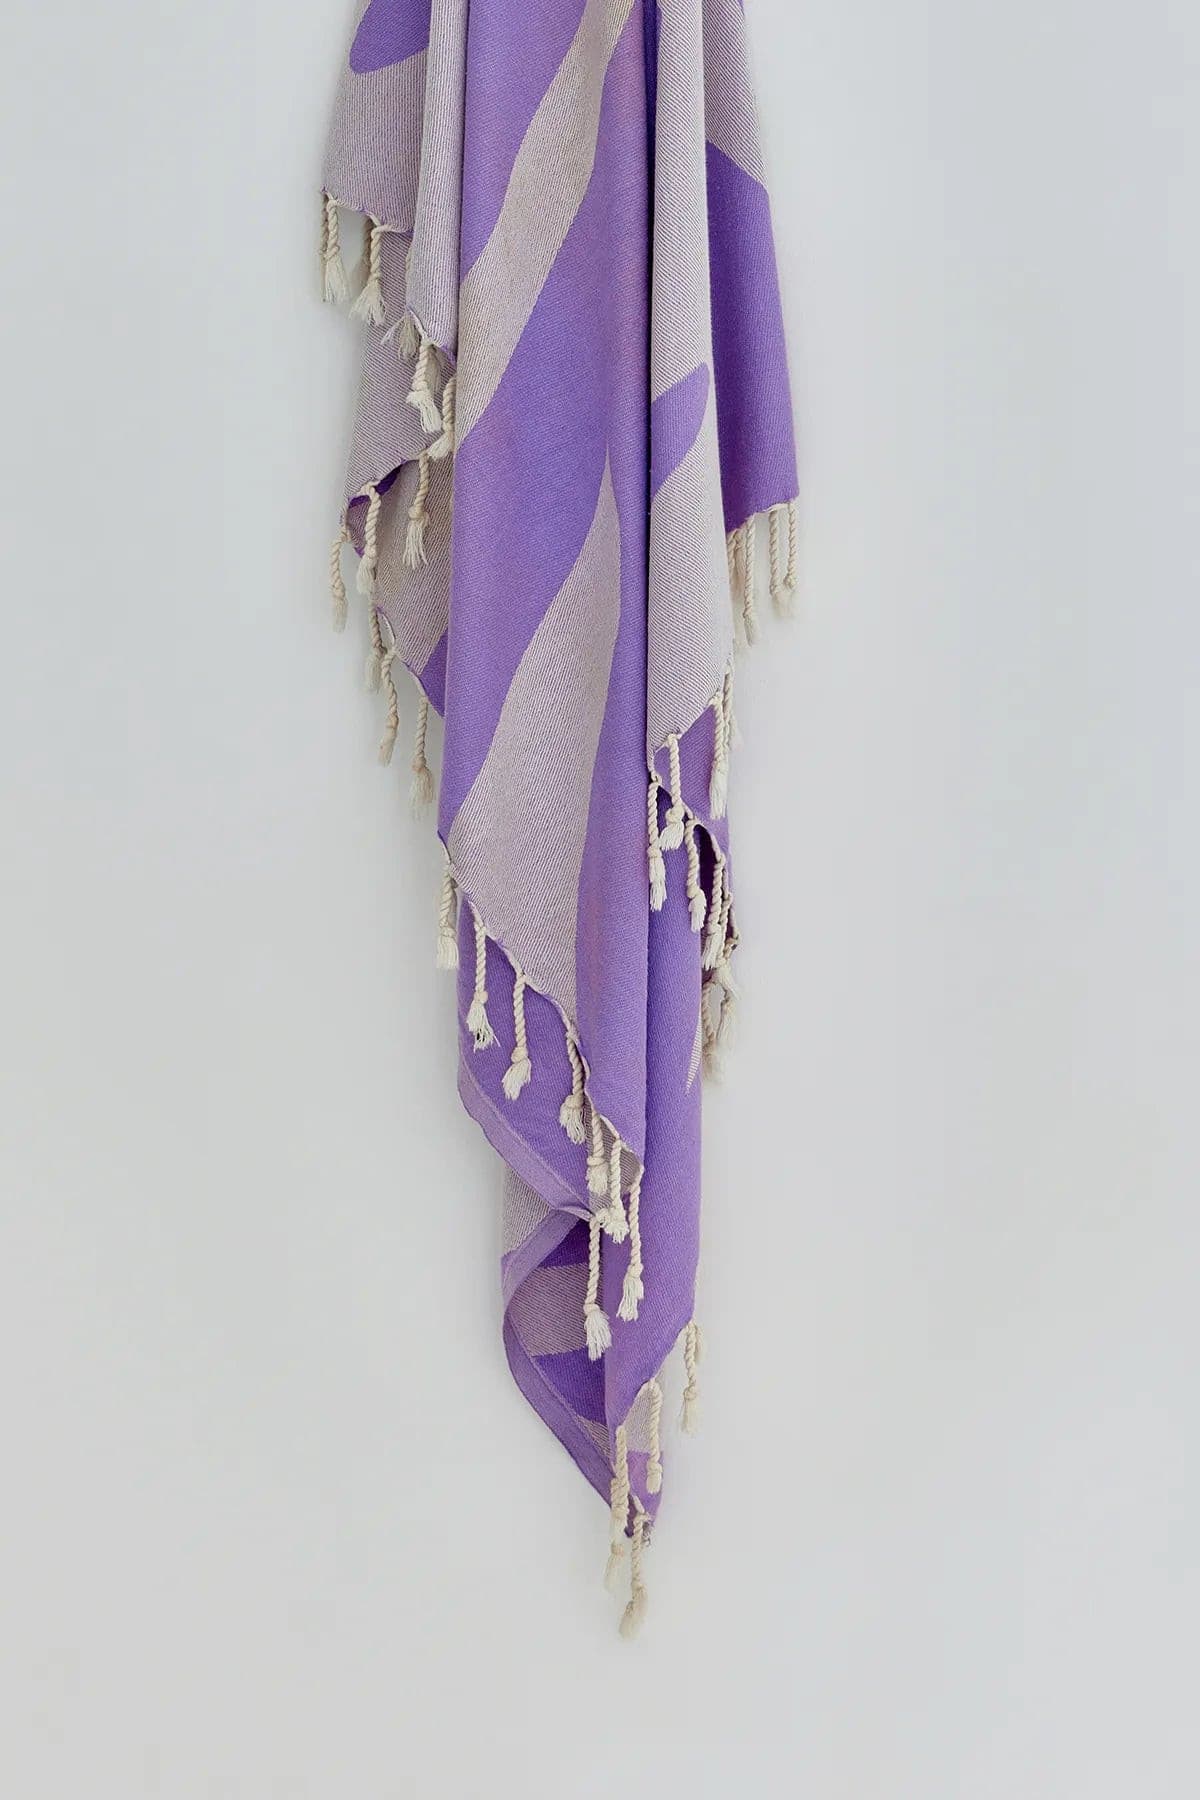 Beach/Bath,living place,Lilac,Turkish towel,detailed,summer,line patterned,double-faces,purified sand,light,compact, easy pack,fun, recycled, double color,diamond,eastern flare,breeze,tropical forest